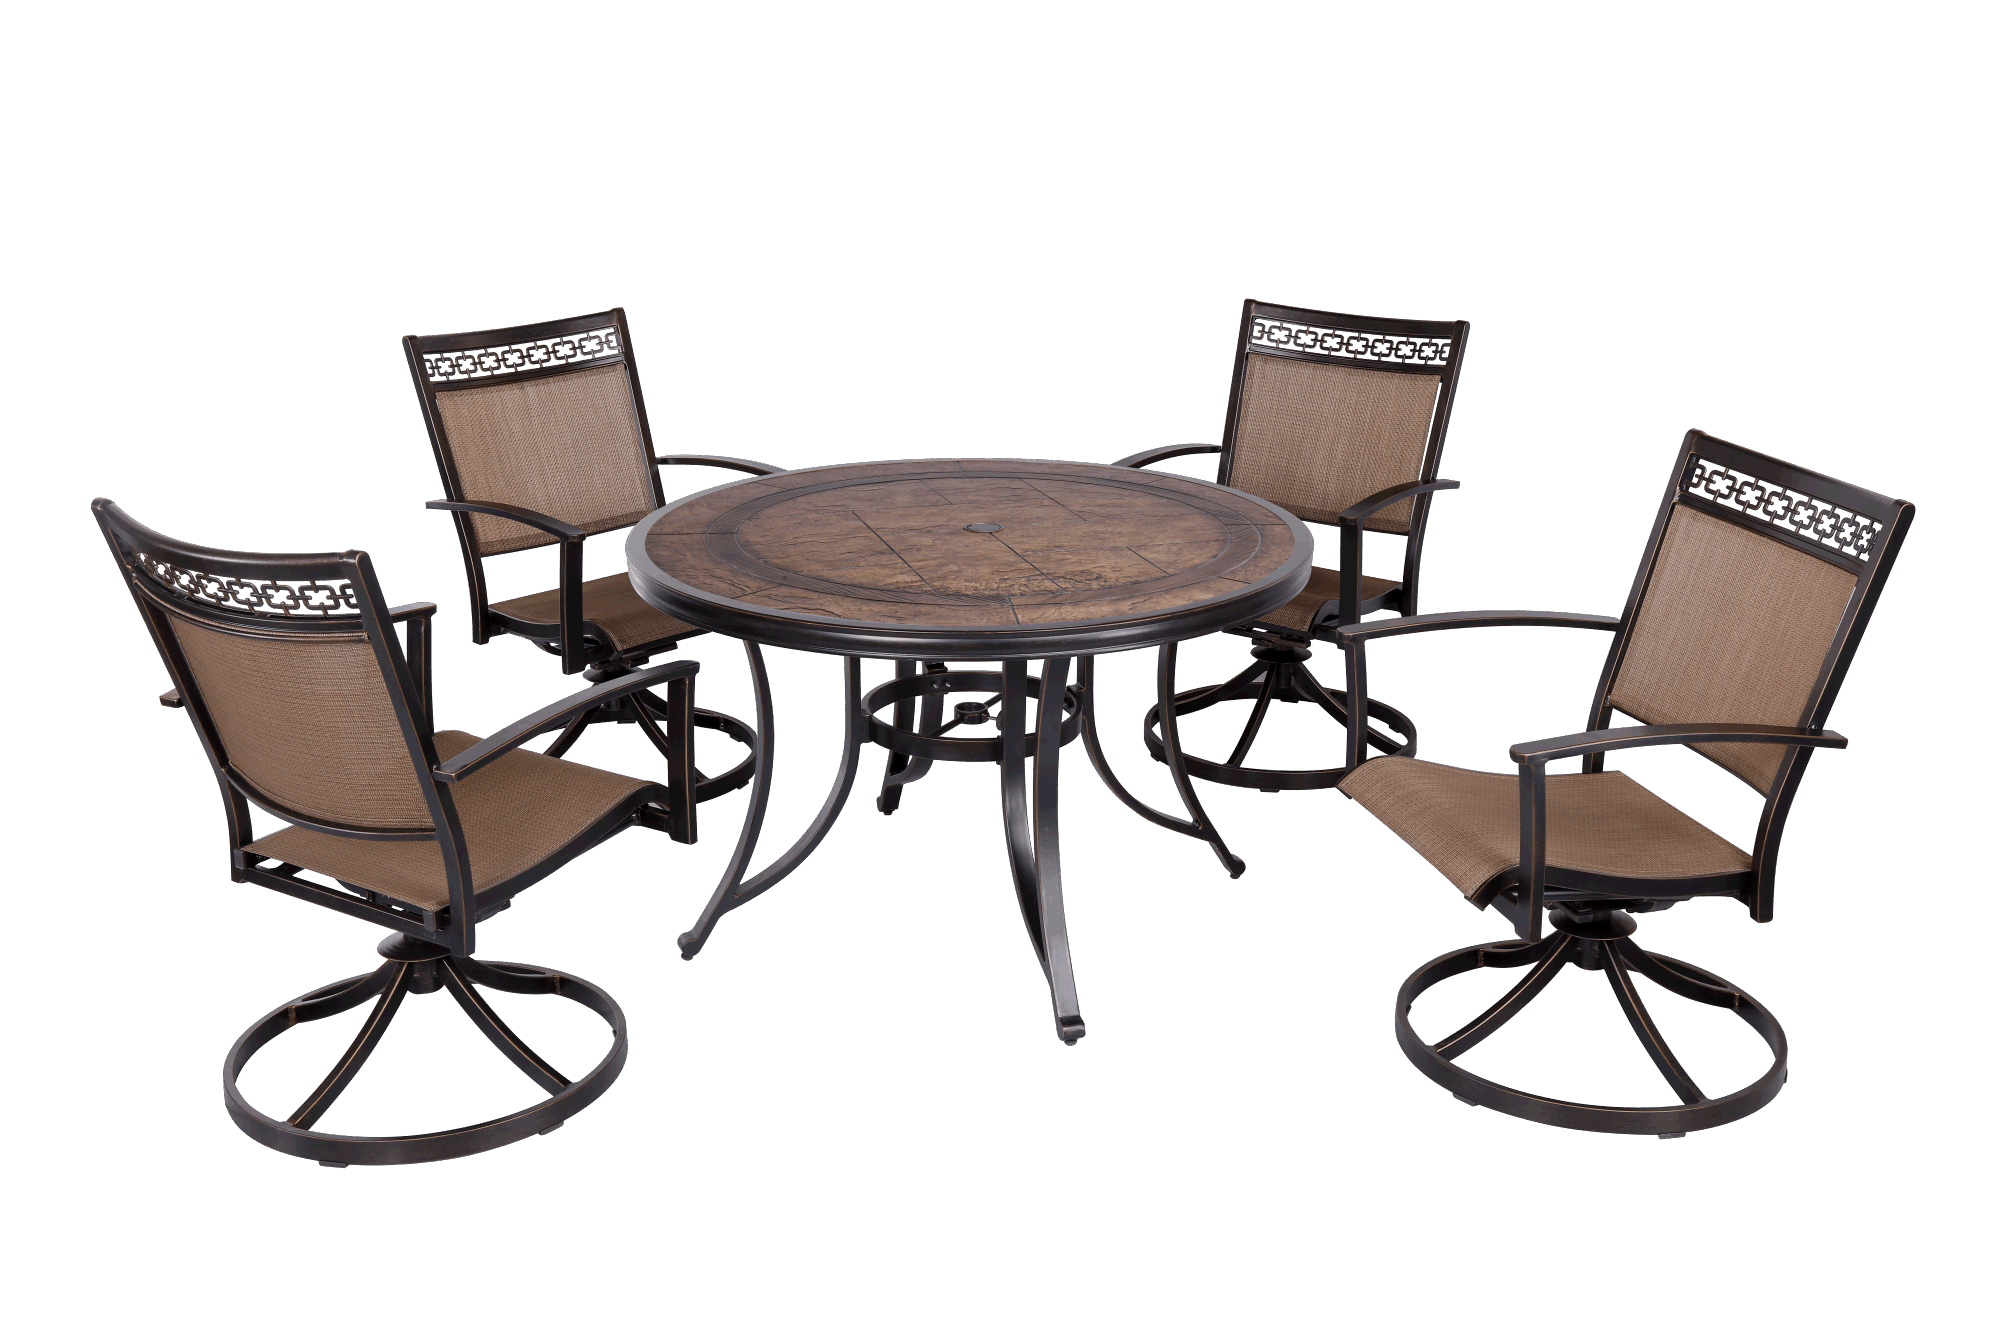 [ONLY FOR PICK UP]Outdoor 5 Piece Dining Set Patio Furniture w/ Aluminum Swivel Rocker Sling Chair Set 4pcs & 1pc 48inch CFT Top Table